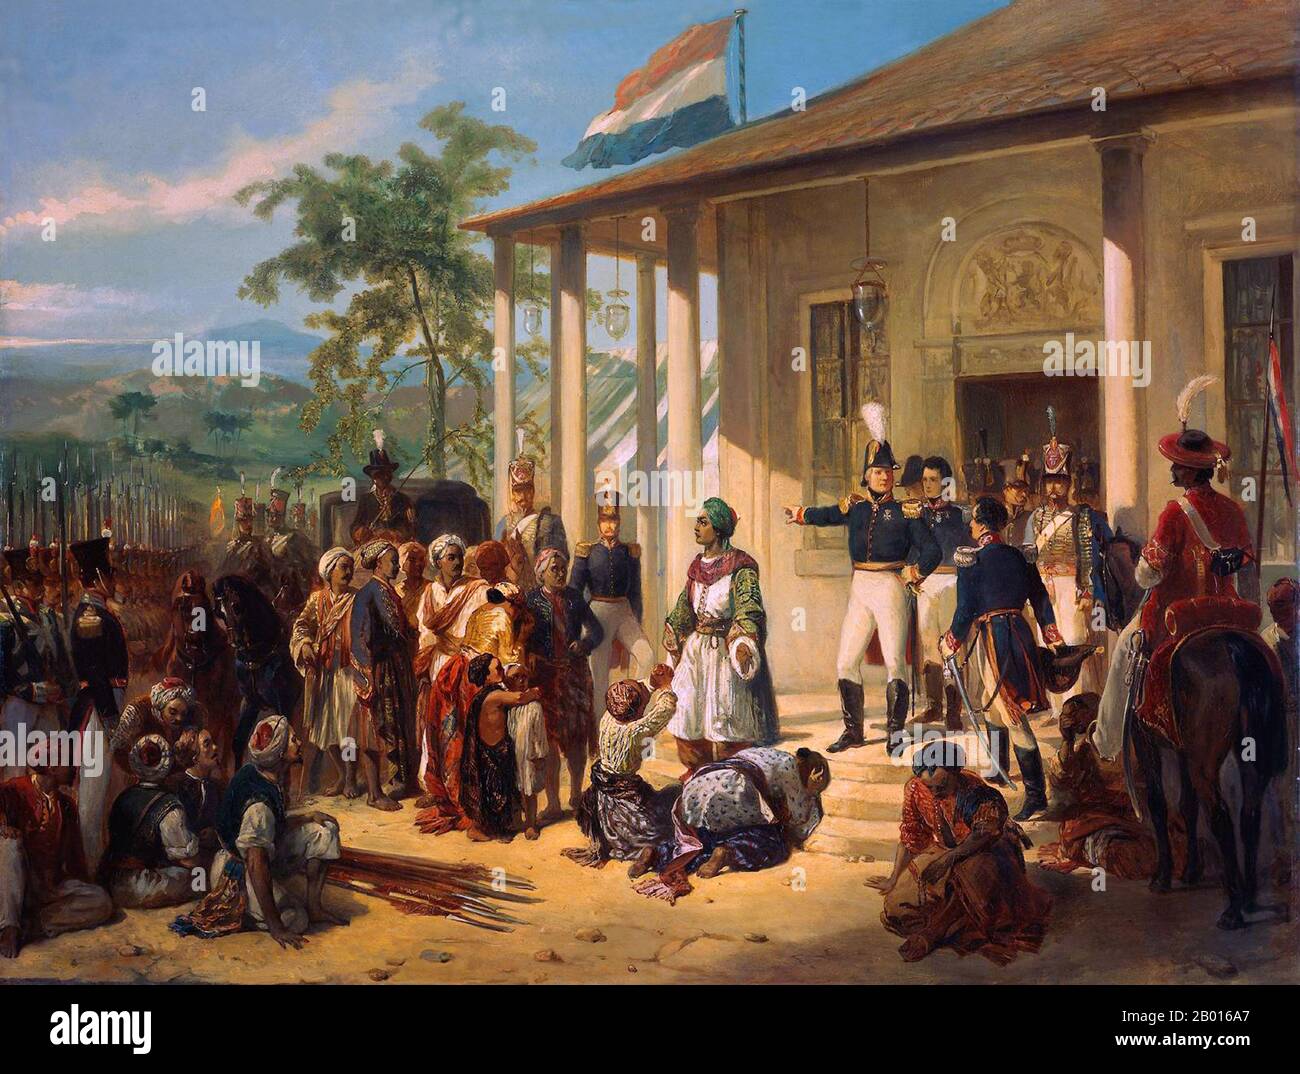 Netherlands / Indonesia: 'The Submission of Prince Dipo Negoro to General De Kock'. Oil on canvas painting by Nicolaas Pieneman (1809-1860), 1835.  The painting depicts the events on March 28, 1830, which brought about the end of the Java War (1825-1830).  The Javanese prince, Dipo Negoro, descends the stairs at the Dutch residence in Magelang after his surrender to General Baron de Kock. Two forlorn figures throw themselves at the prince’s feet. On the ground, in token of the surrender, lie a number of spears belonging to Dipo Negoro's followers. De Kock resolutely points to a carriage. Stock Photo